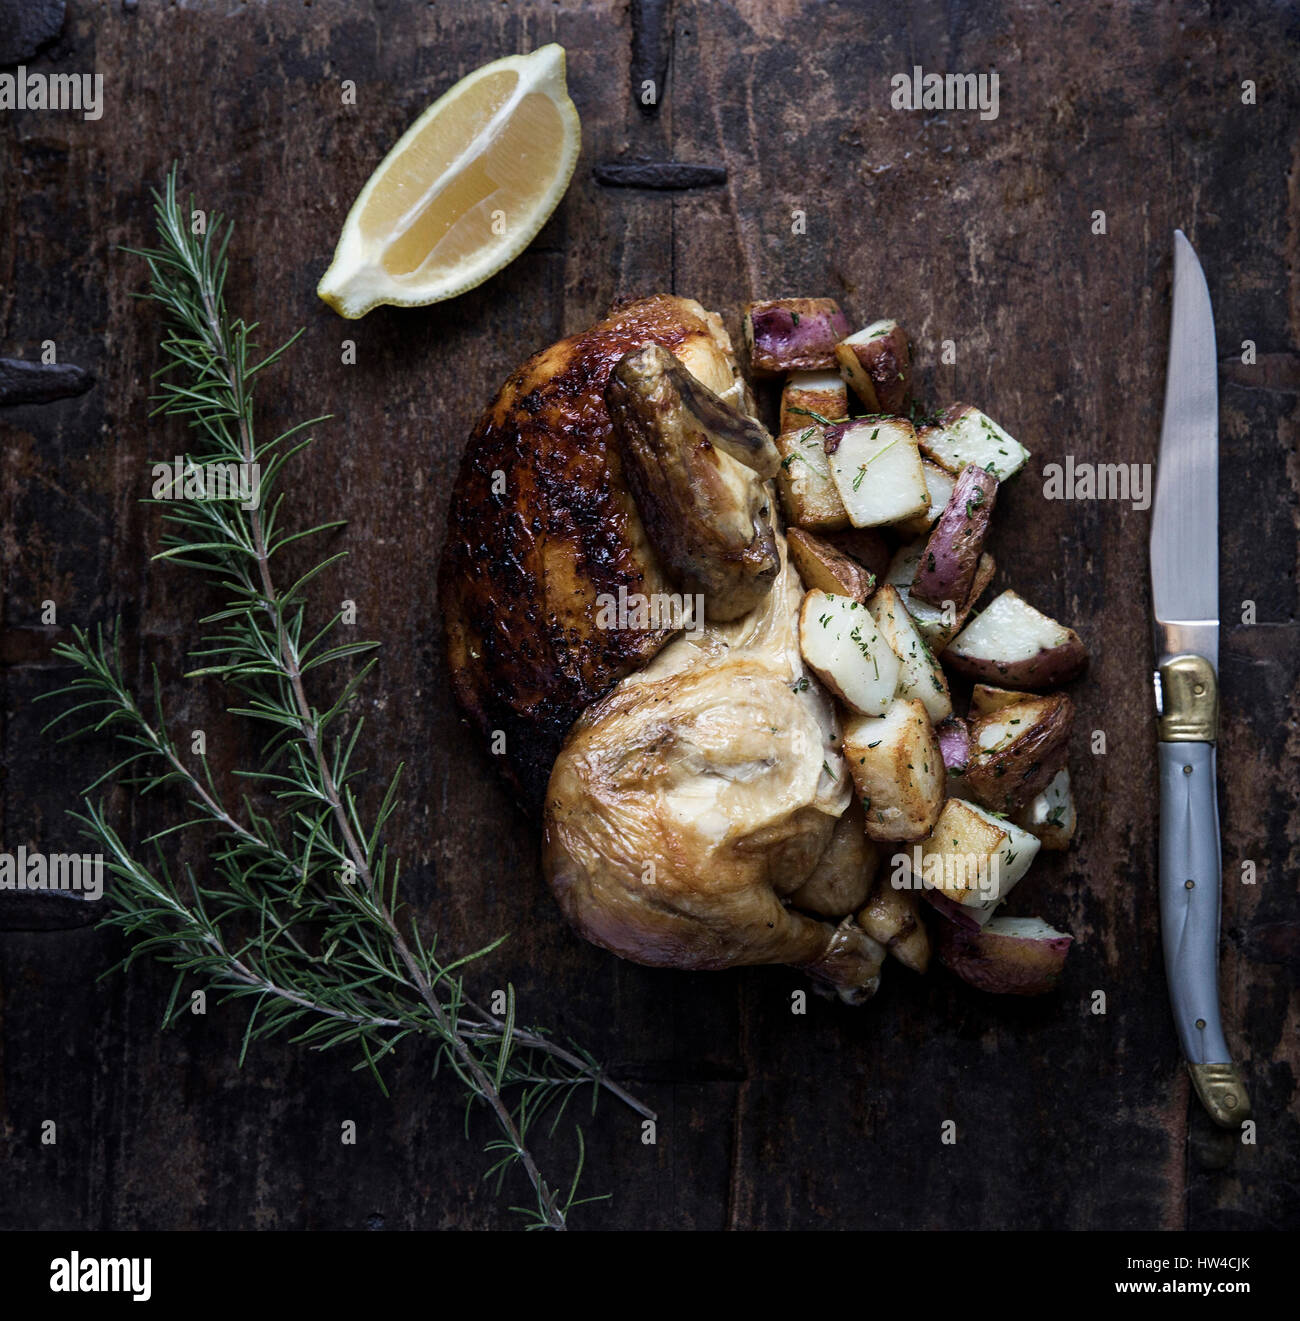 Roasted chicken with potatoes and lemon Stock Photo